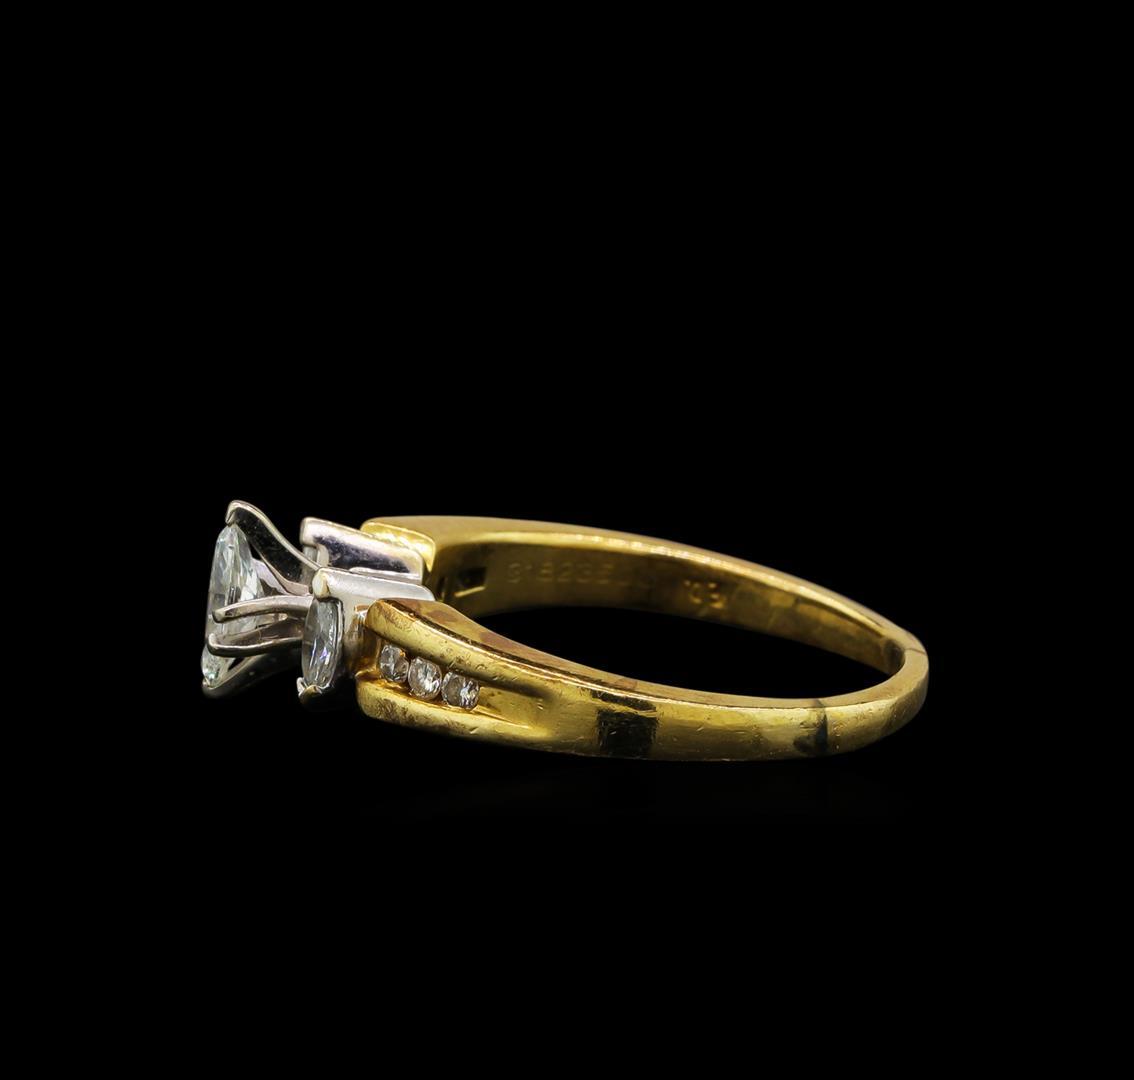 0.53 ctw Diamond Ring - 14KT Yellow and White Gold